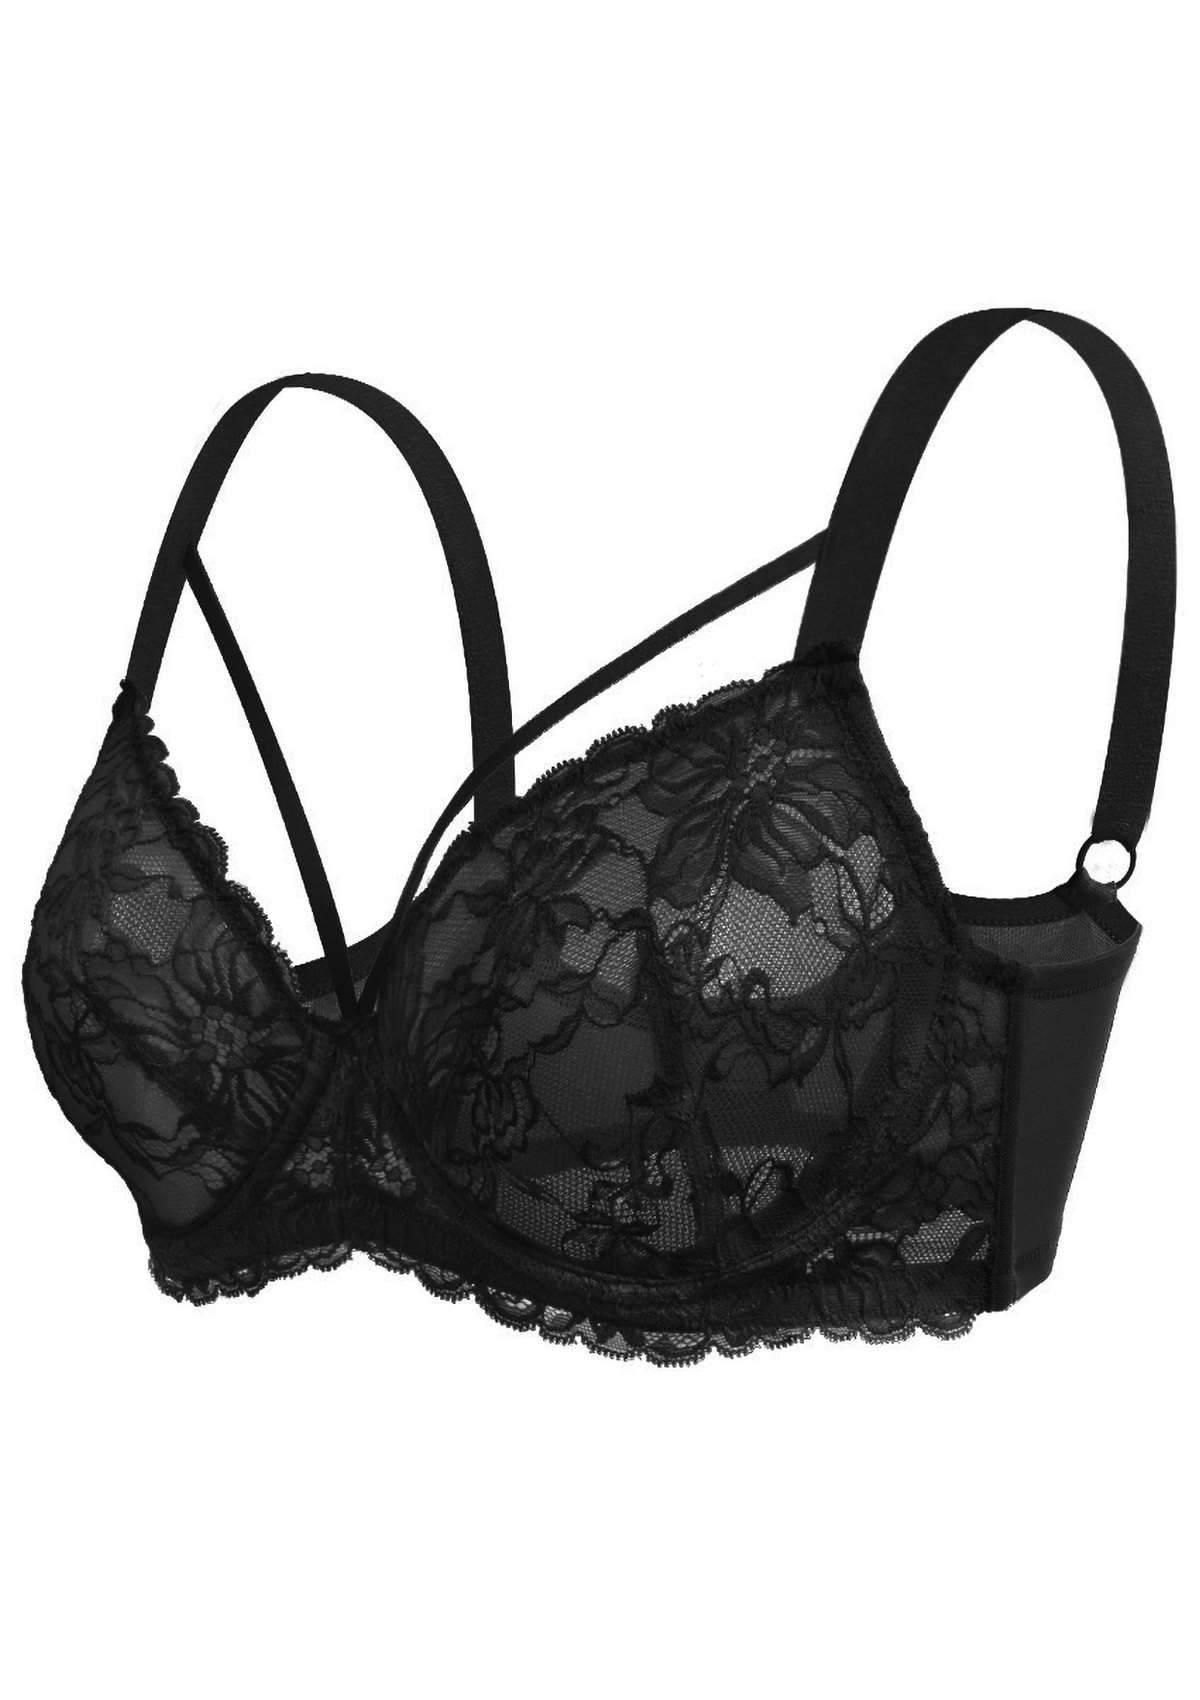 HSIA Pretty In Petals Bra - Plus Size Lingerie For Comfrot And Support - Black / 38 / C